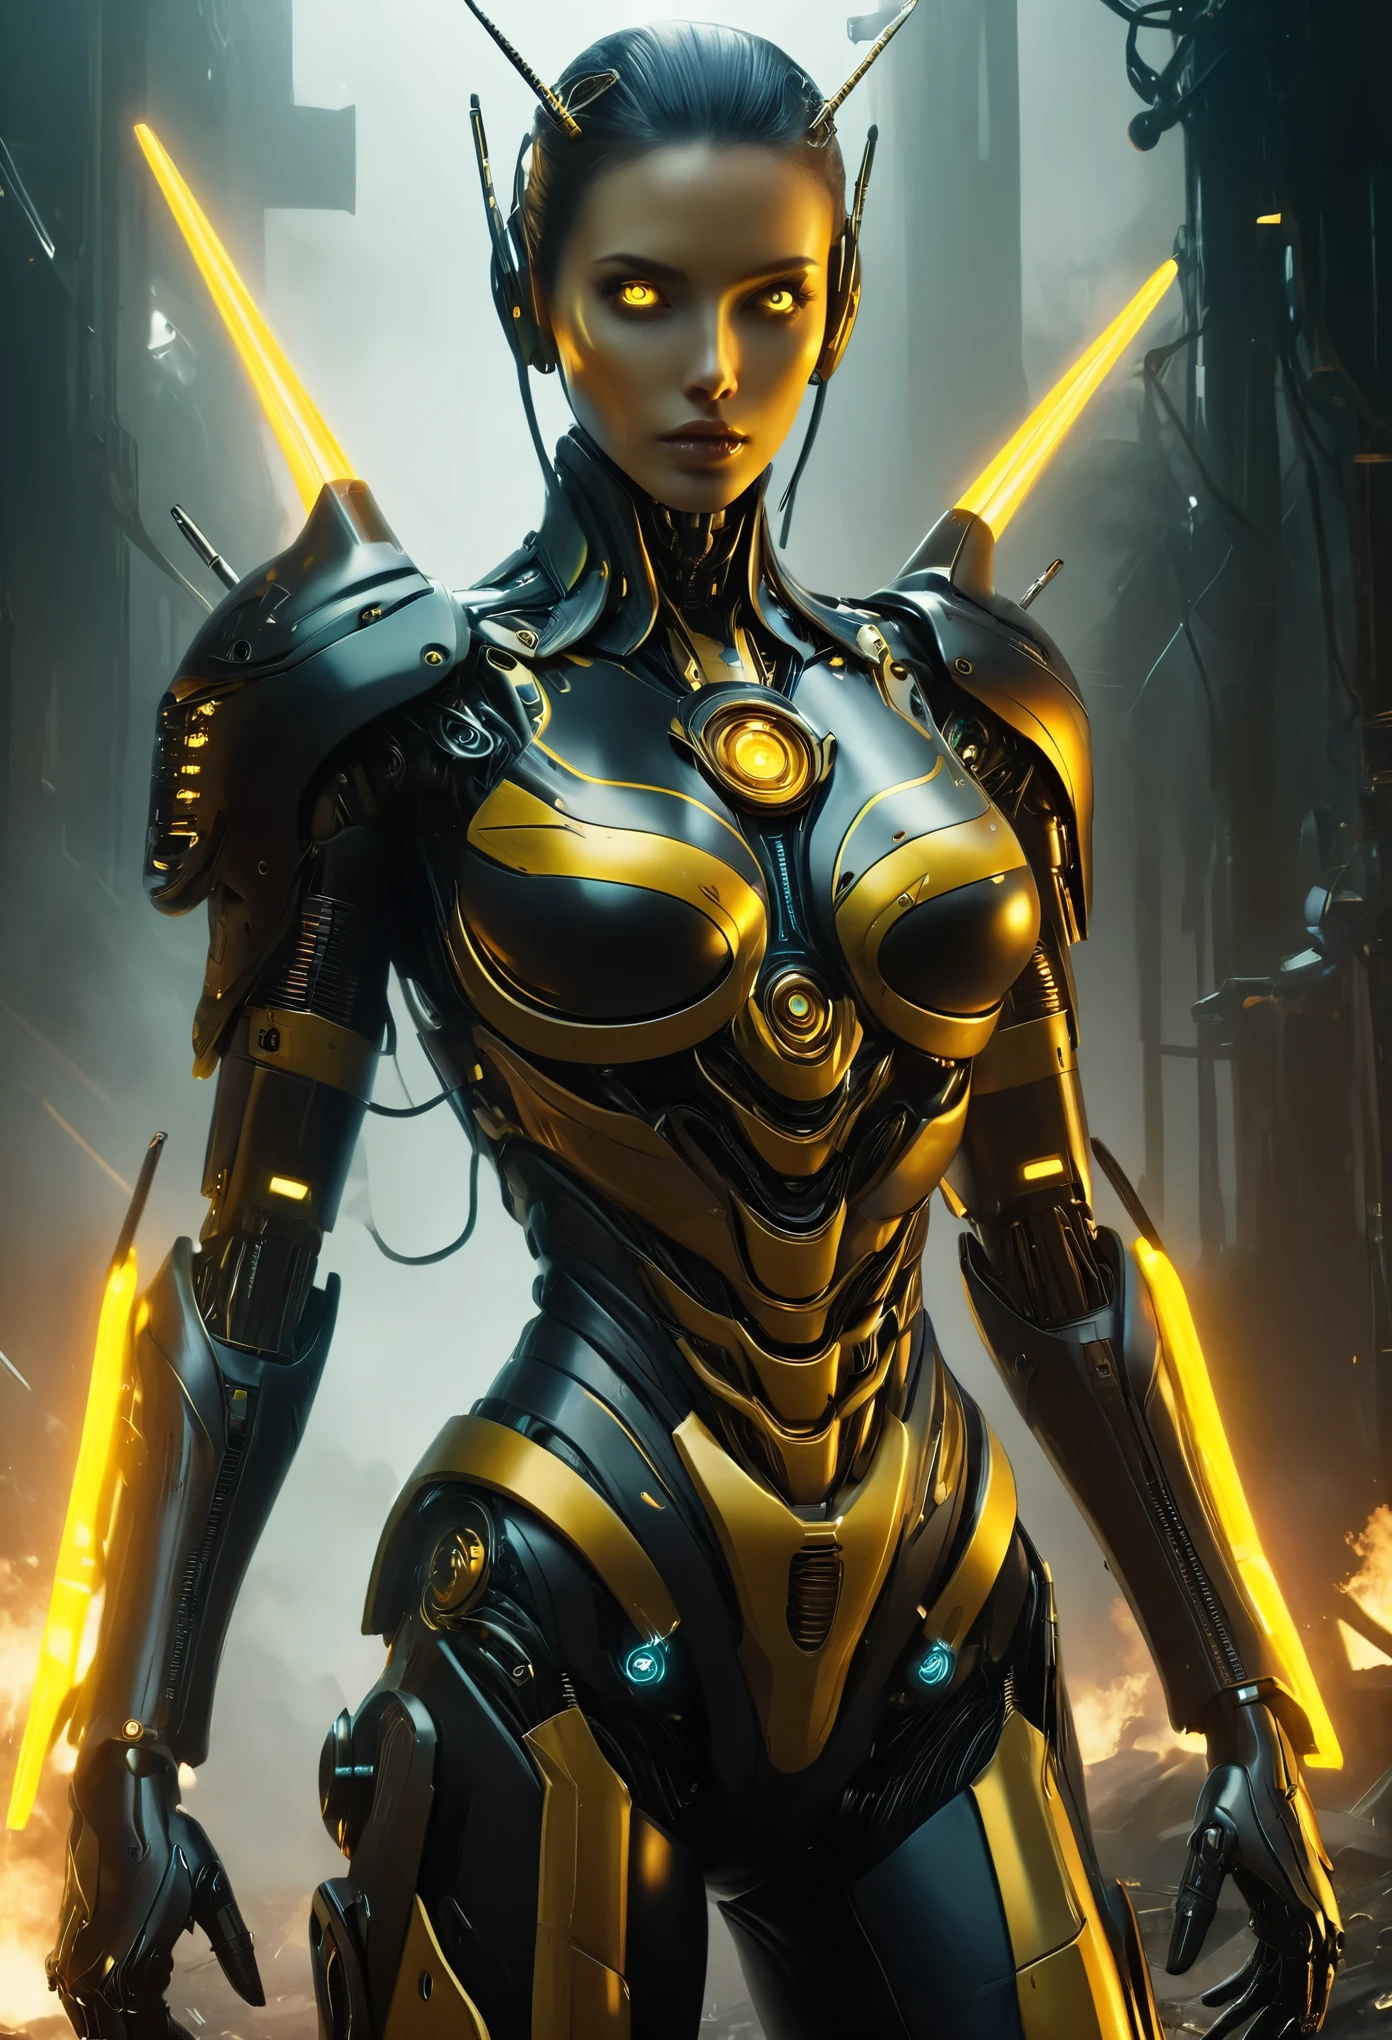 (Best Quality, 4K, 8K, High Definition, Masterpiece:1.2), (Ultra Detailed, Realistic, Photorealistic:1.37),A terrifying female combat android combined with a human female and a hornet, featuring yellow and black color scheme, enormous compound eyes, and futuristic technology. The android has a fearsome appearance with a toned and muscular body. It is equipped with advanced weaponry and armor that displays intricate mechanical details. The android's face possesses a combination of human-like features and the distinct characteristics of a hornet, including razor-sharp mandibles and antennae. Its eyes are exceptionally large, comprised of countless facets and emit an intimidating glow. The android's metallic exoskeleton is predominantly yellow, with striking black accents that give it a menacing presence. The armor is sleek and seamless, exhibiting a seamless integration with the android's physique. The scene is set in a futuristic battleground, with crumbling buildings and debris surrounding the combat android. Flames and smoke billow from destroyed structures, evoking a sense of chaotic destruction. The lighting in the scene is dramatic, with harsh spotlights casting long shadows across the android, emphasizing its imposing figure. The overall color palette is dominated by shades of yellow and black, creating a strong and menacing atmosphere. The image quality is of the highest standard, capturing every intricate detail of the combat android and the surrounding environment.(NDFW:1.3)